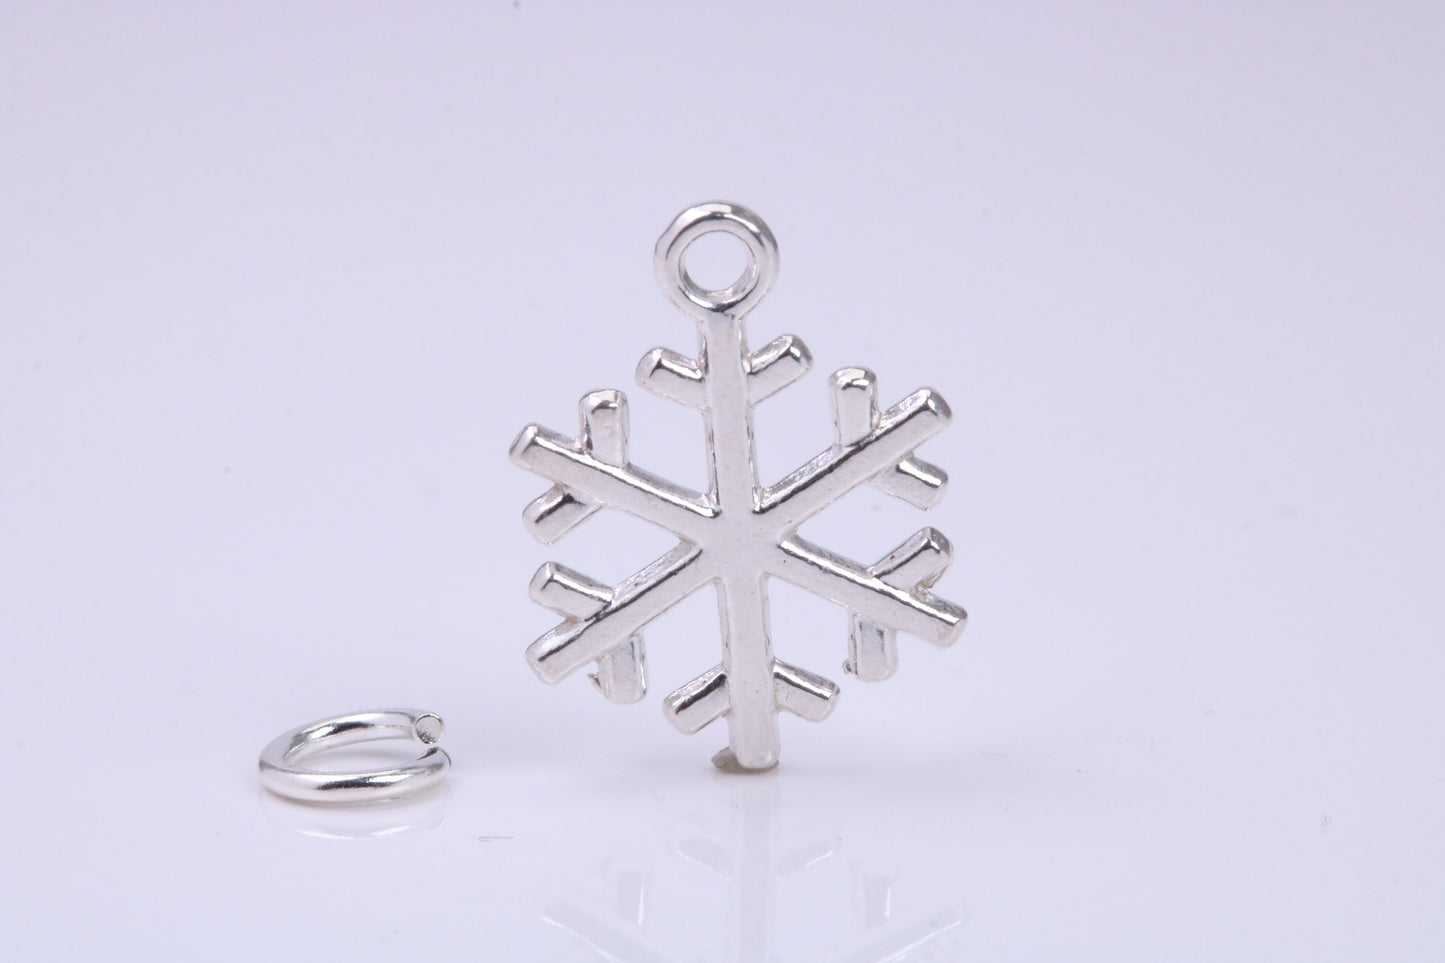 Snow Flake Charm, Traditional Charm, Made from Solid 925 Grade Sterling Silver, Complete with Attachment Link